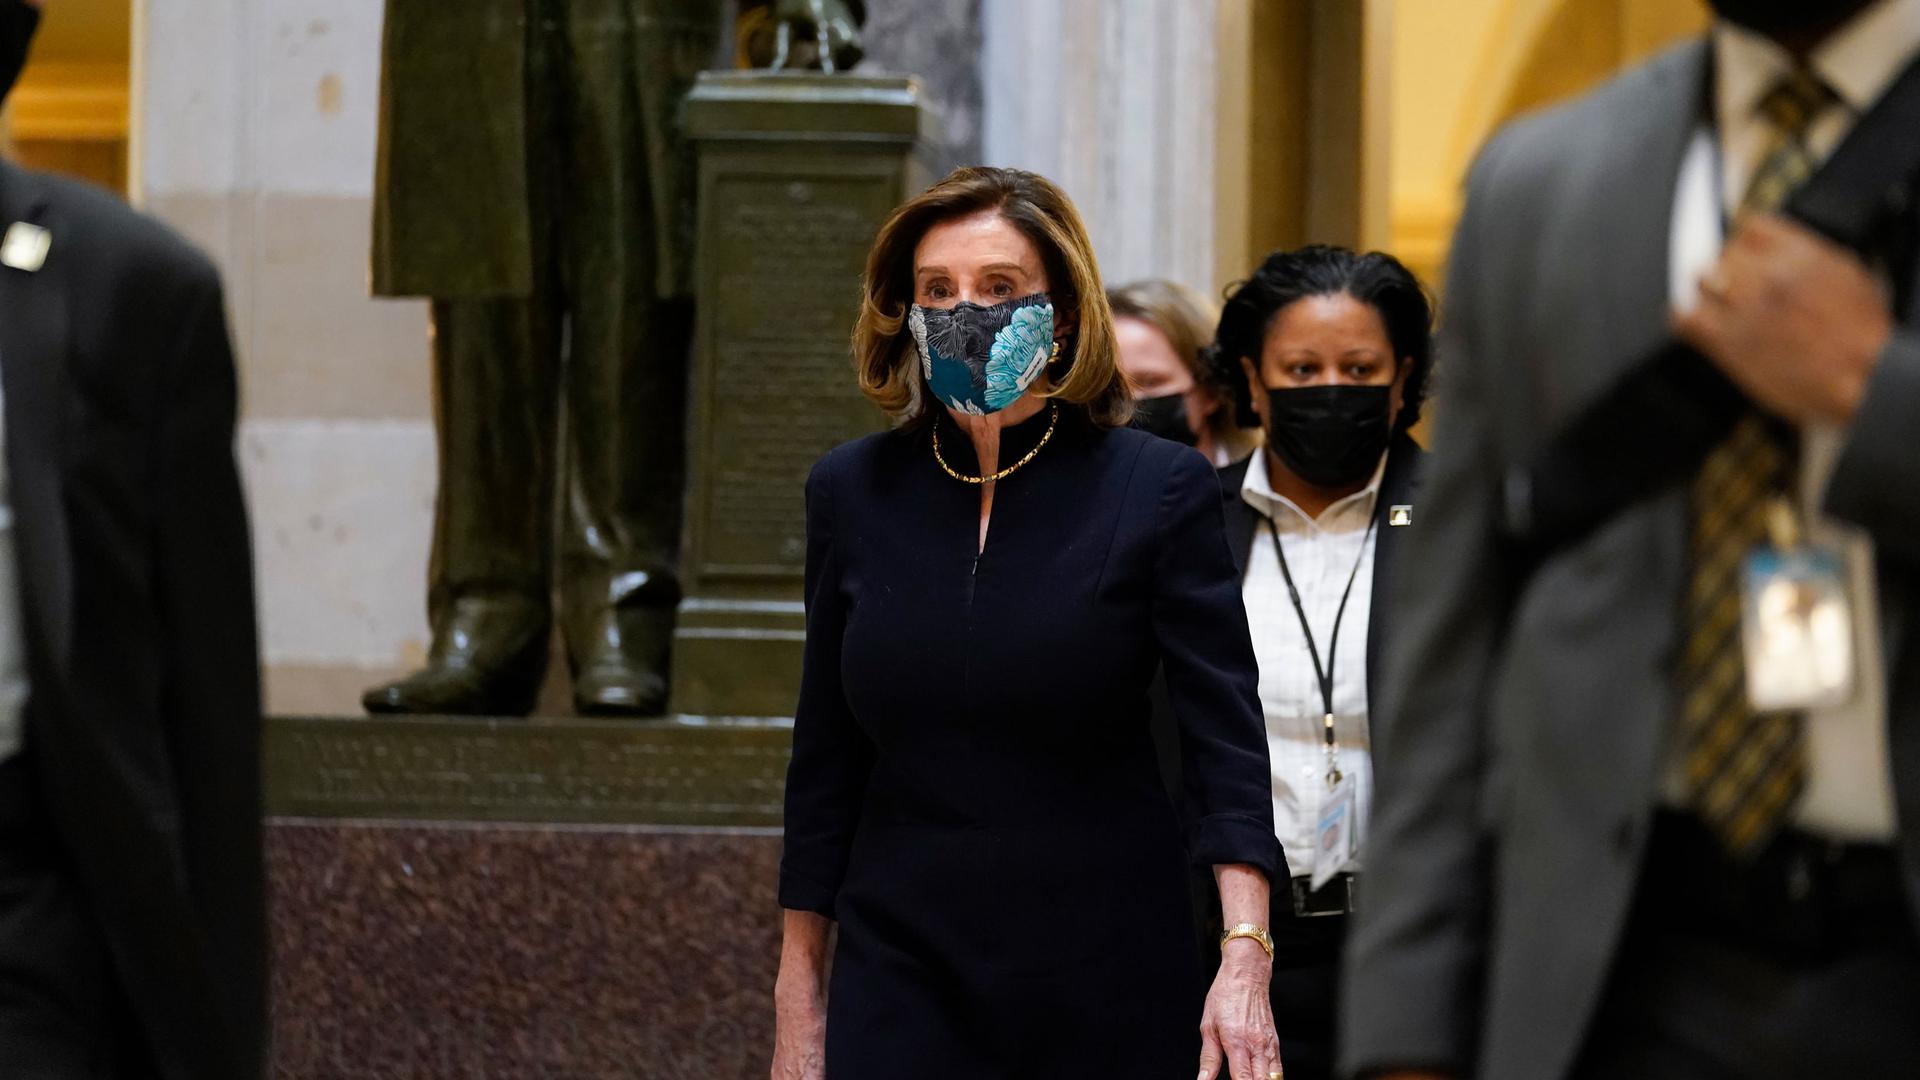 Speaker of the House Nancy Pelosi is shown wearing a dark suit and a face mask while walking in the halls of Capitol Hill.